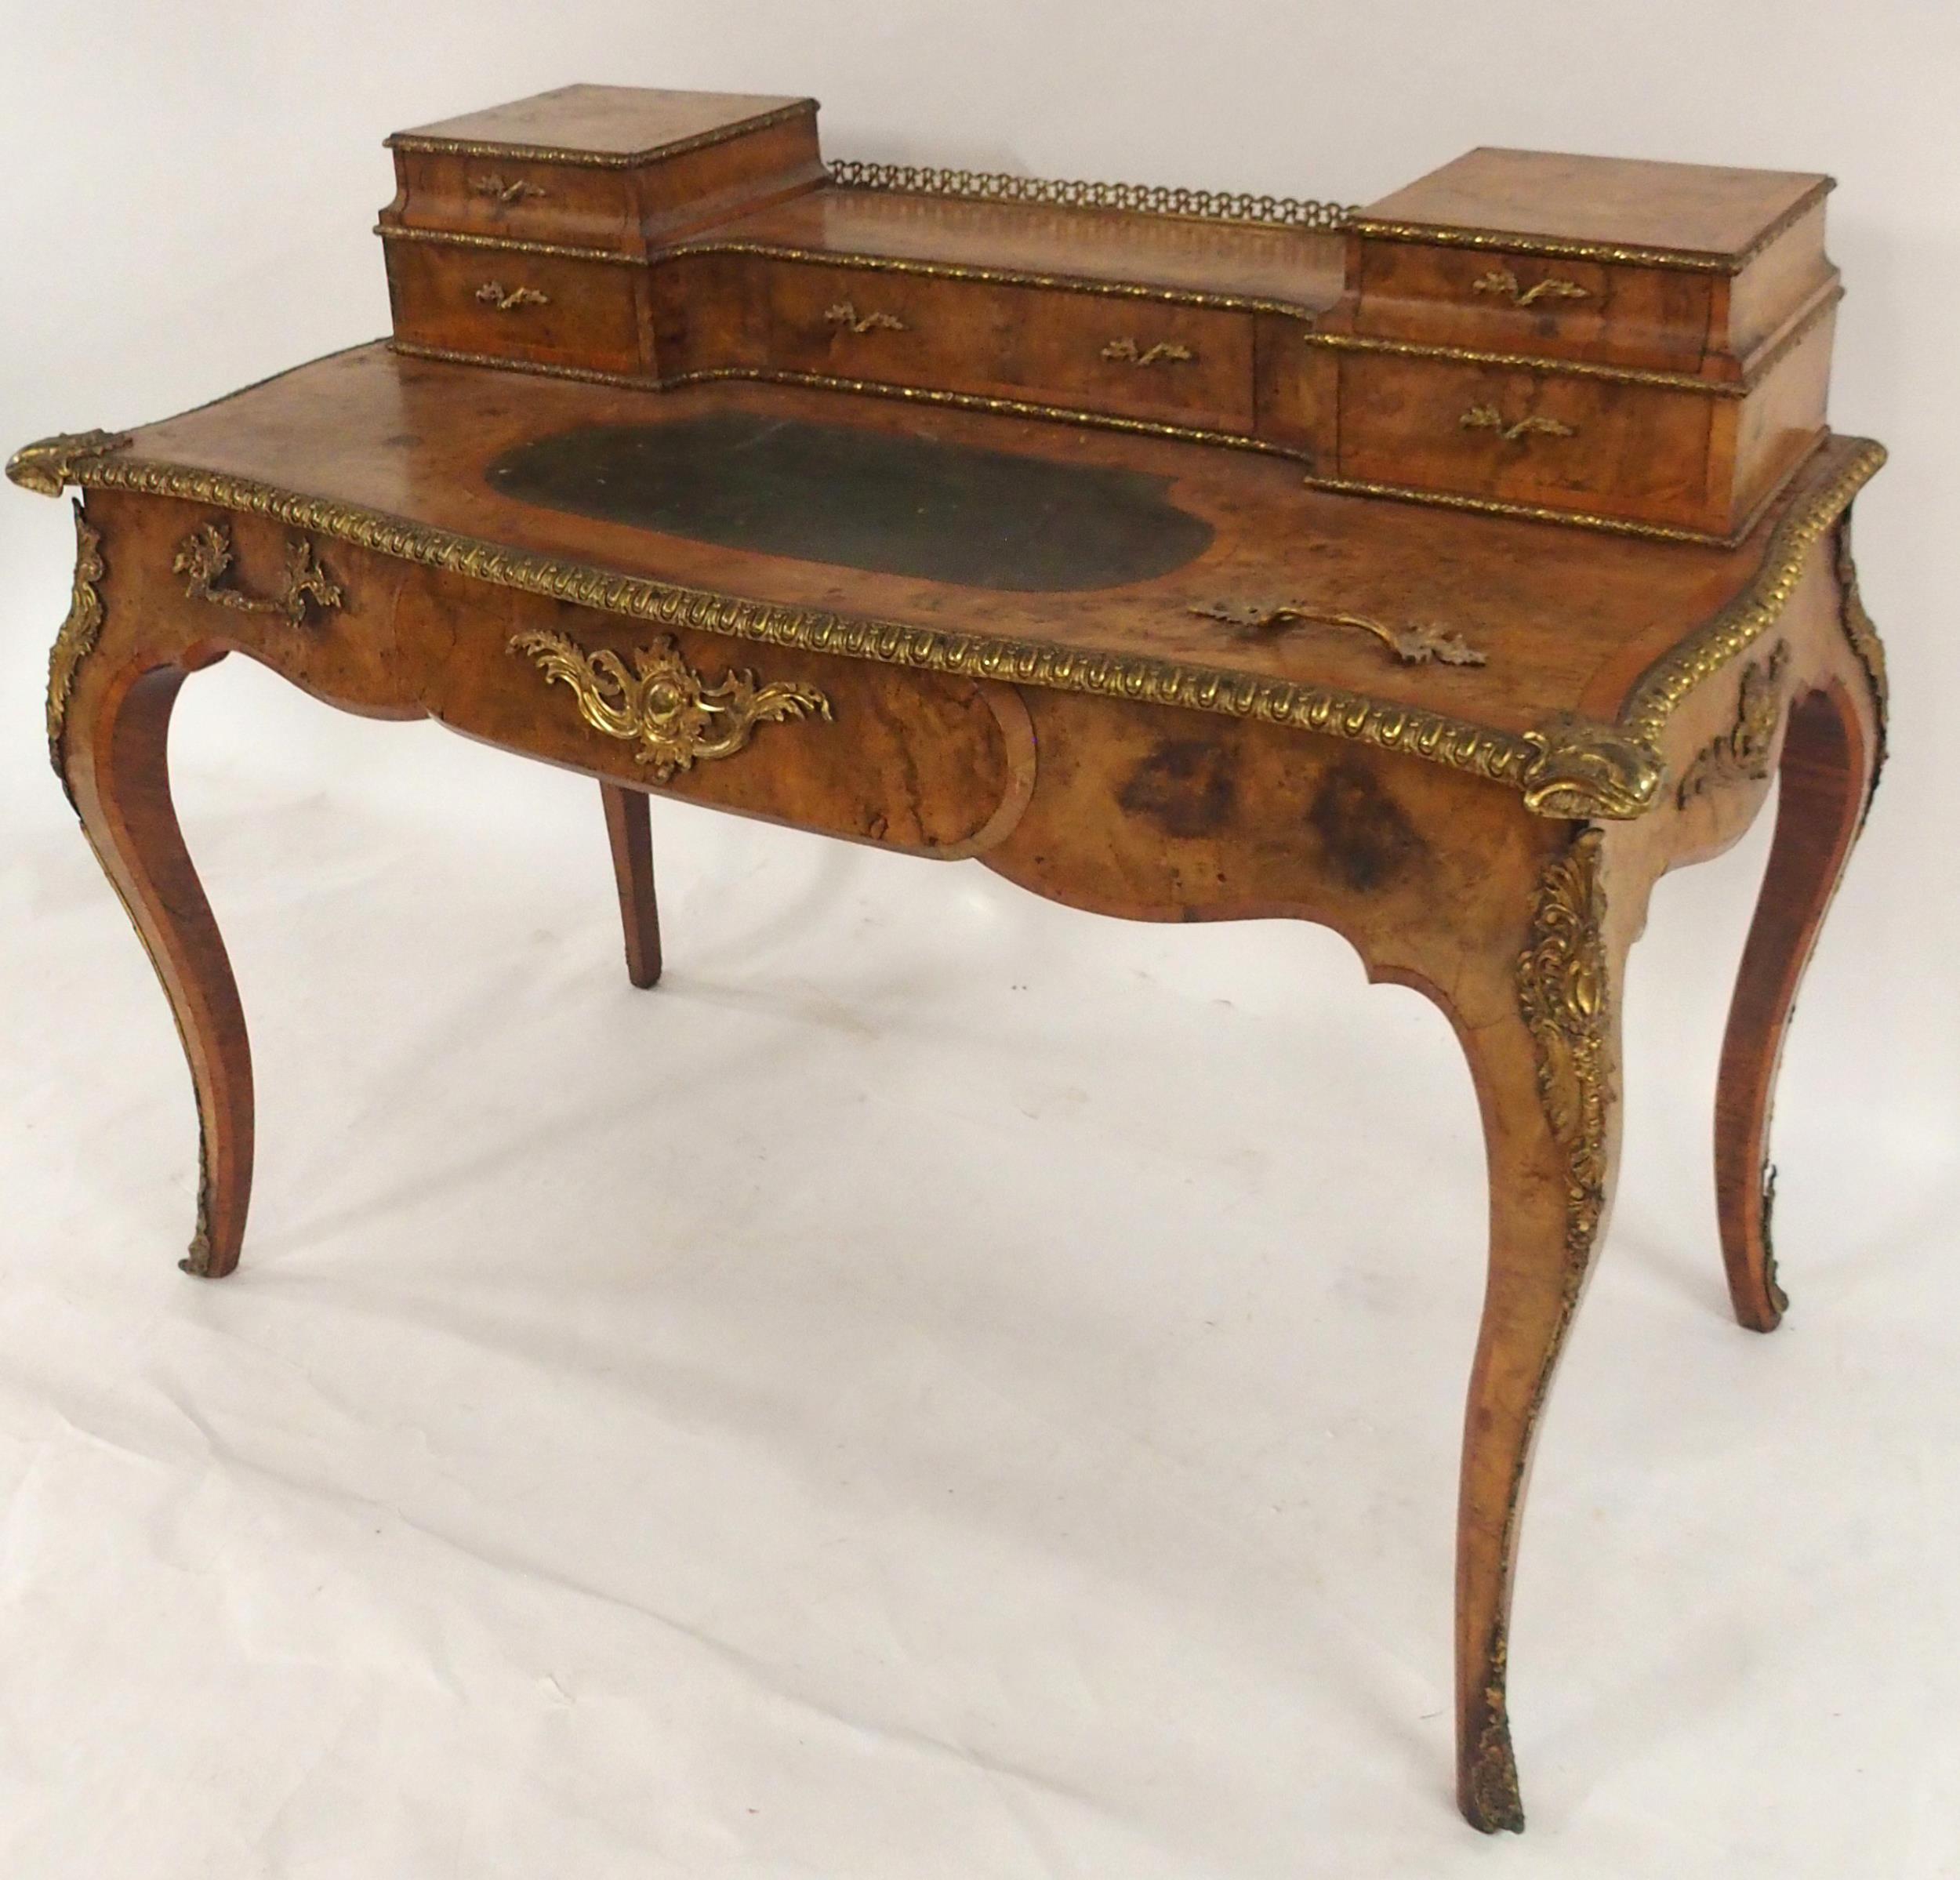 A LOUIS XVI STYLE BURR WALNUT AND ORMOLU MOUNTED BUREAU PLAT with five drawered superstructure - Image 12 of 14